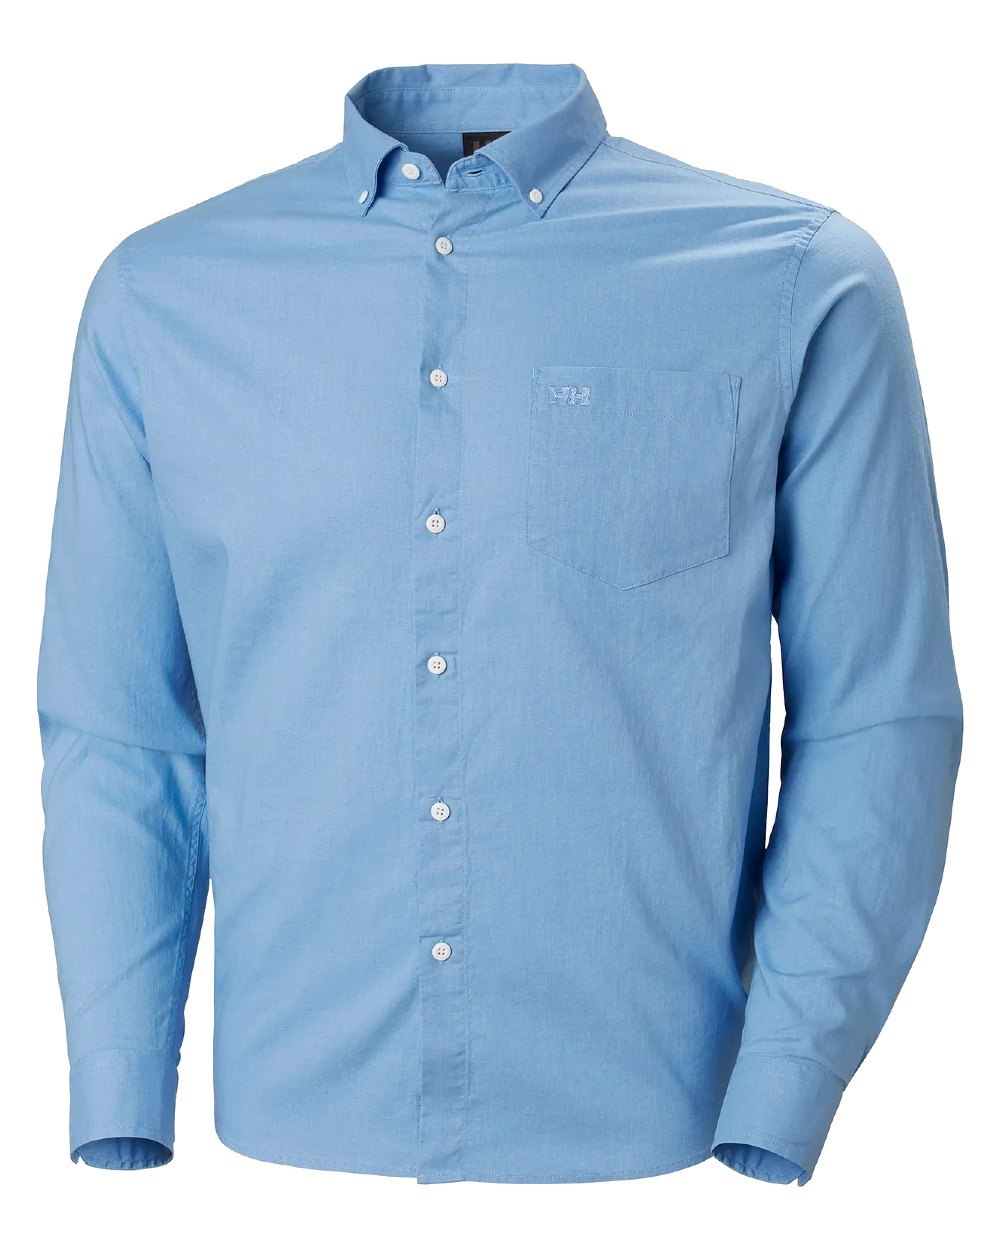 Bright Blue coloured Helly Hansen Mens Club Long Sleeves Shirt on white background 